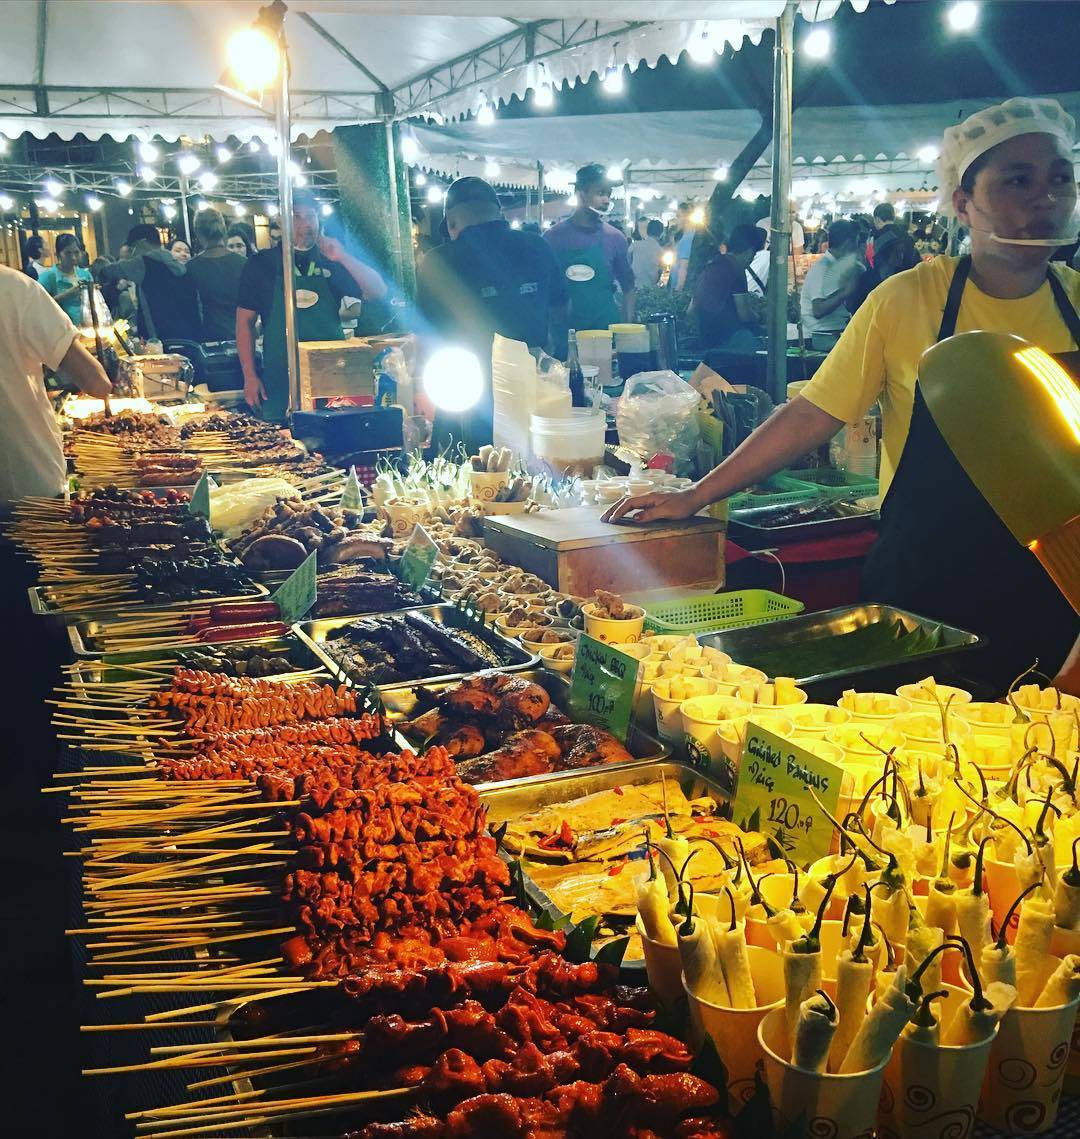 A #Friday food stand with an abundant variety of skewers to satisfy every taste.